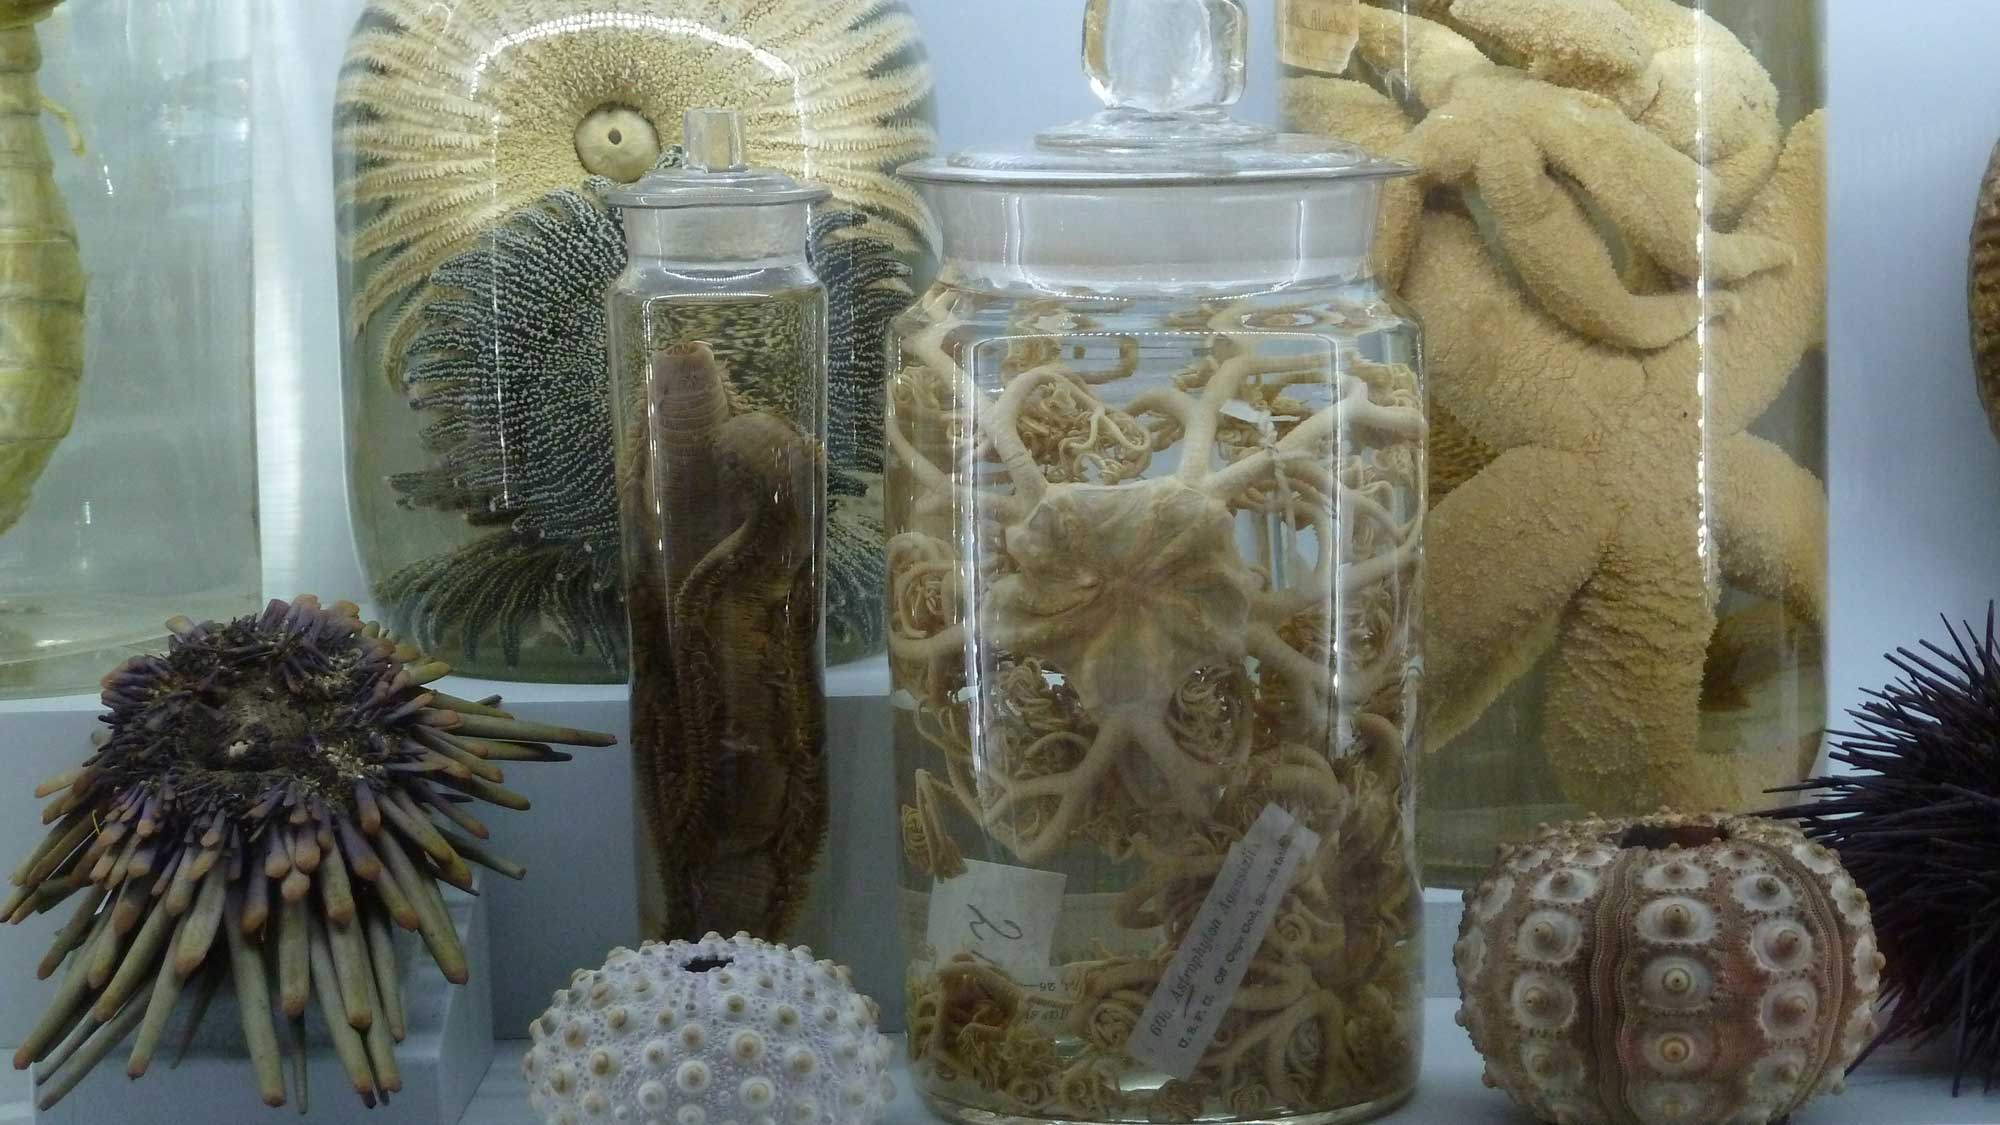 Modern echinoderms preserved in jars with echinoid tests on display